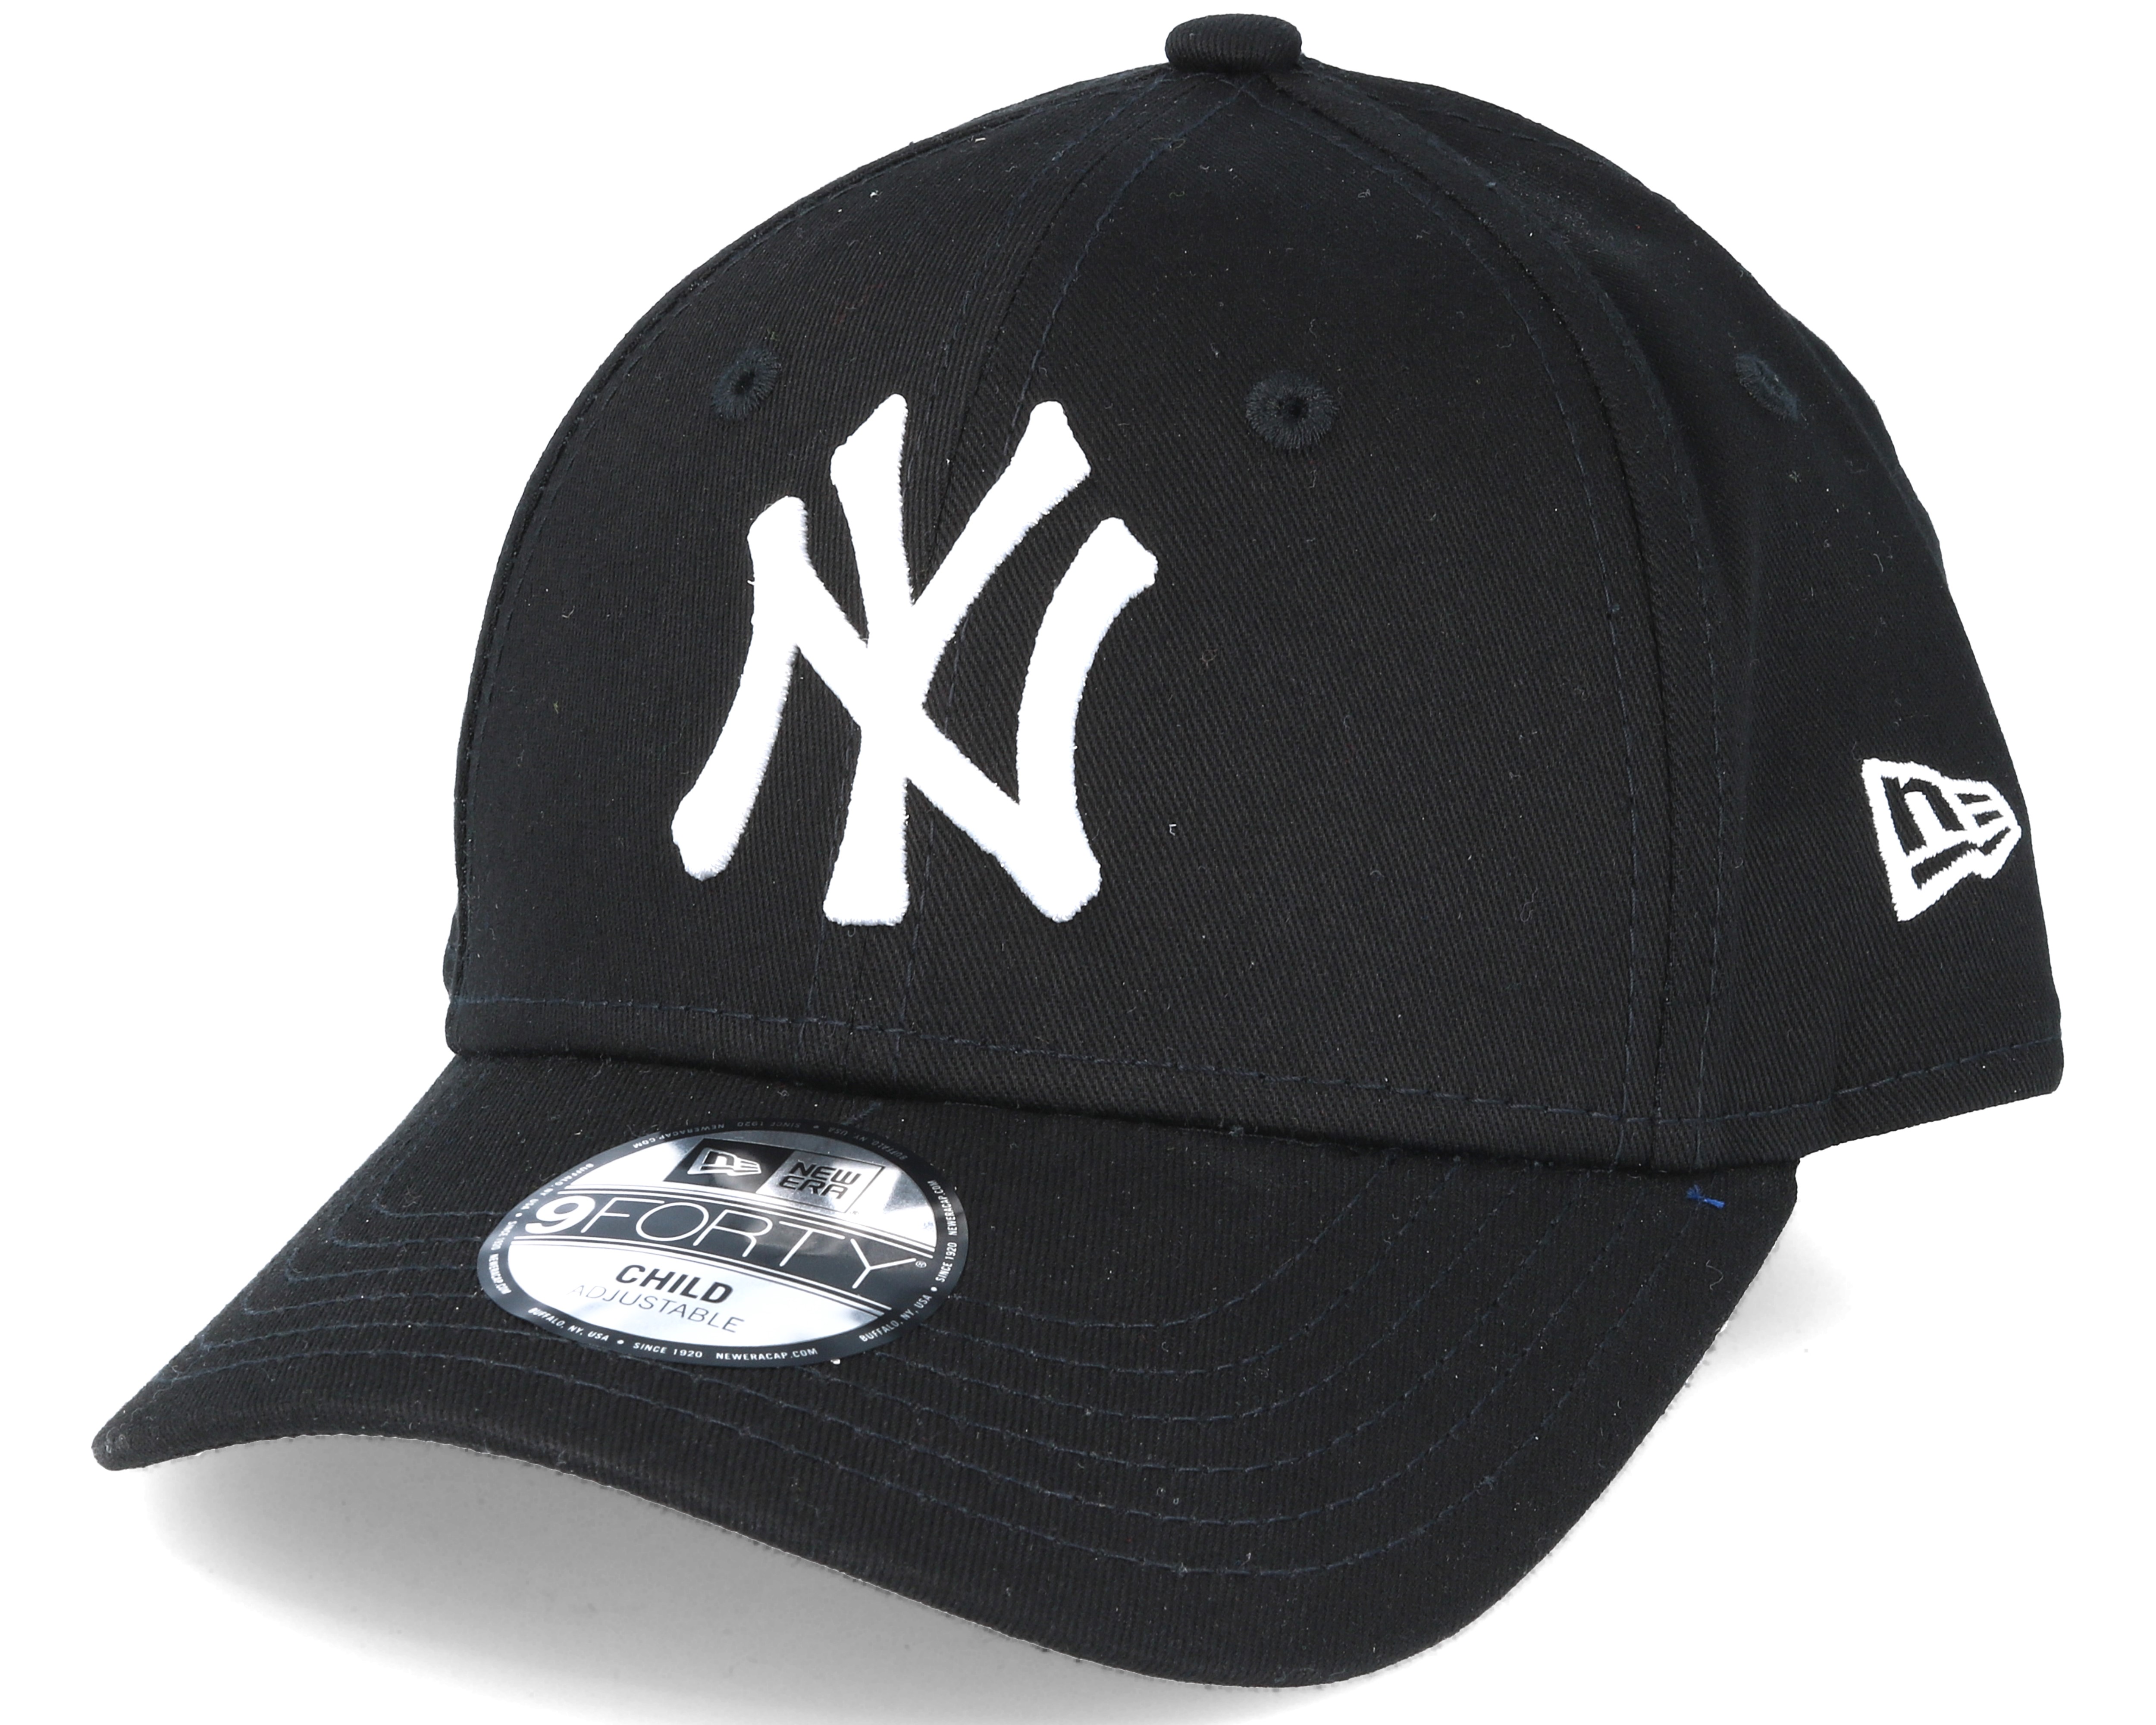 Manufacturer's Size: OSFA One Size Black New Era Jersey Pop 940 New York Yankees Navy/Vice Blue 9FORTY Cap